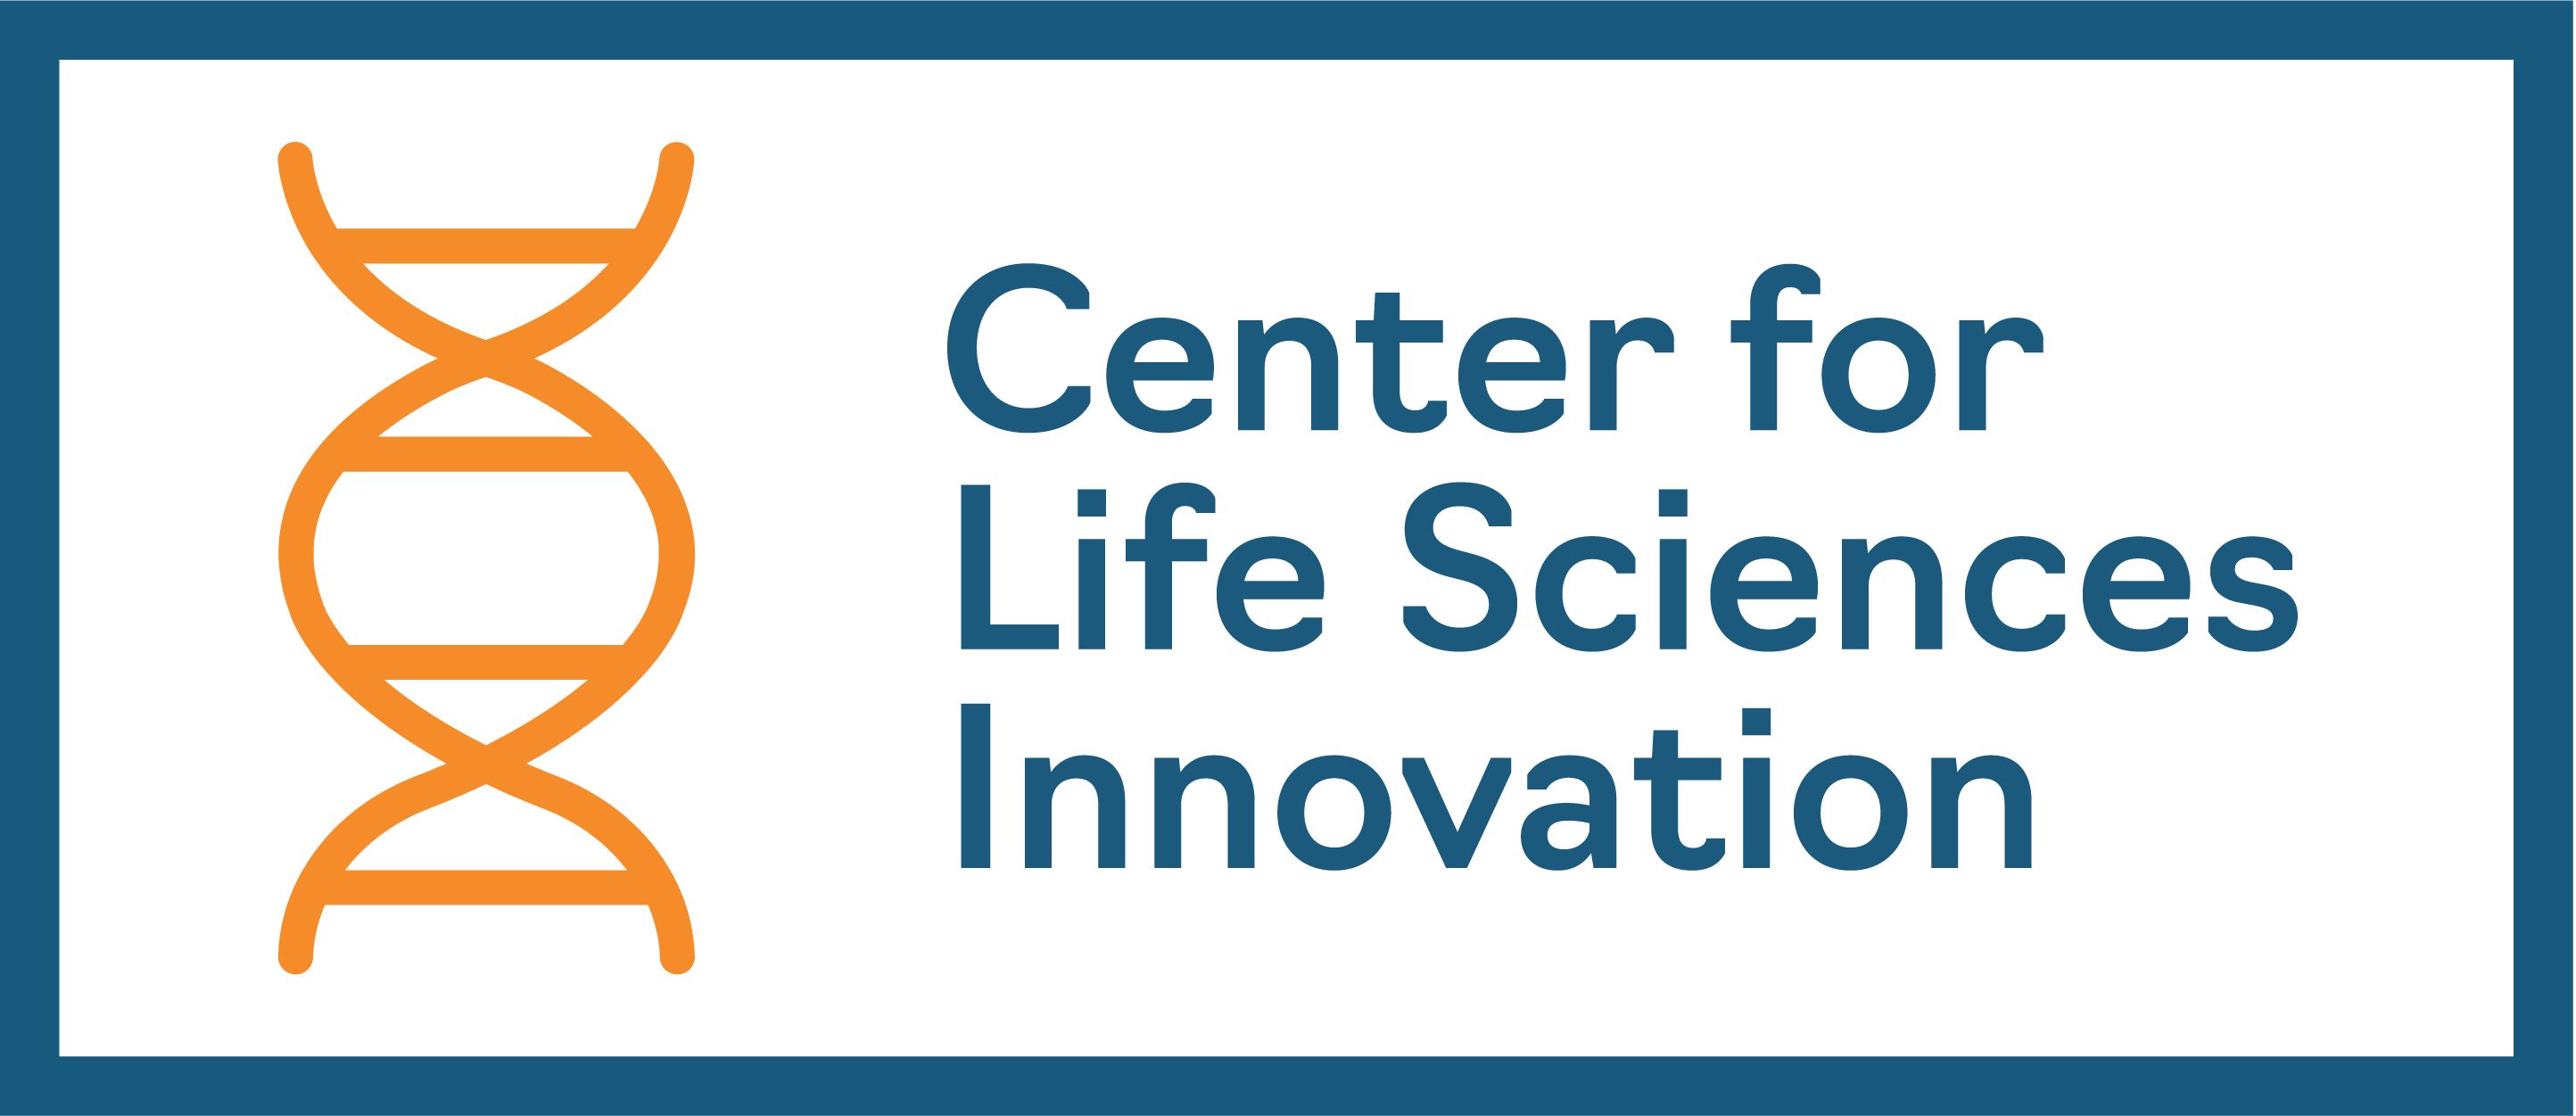 Center for Life Sciences Innovation | ITIF